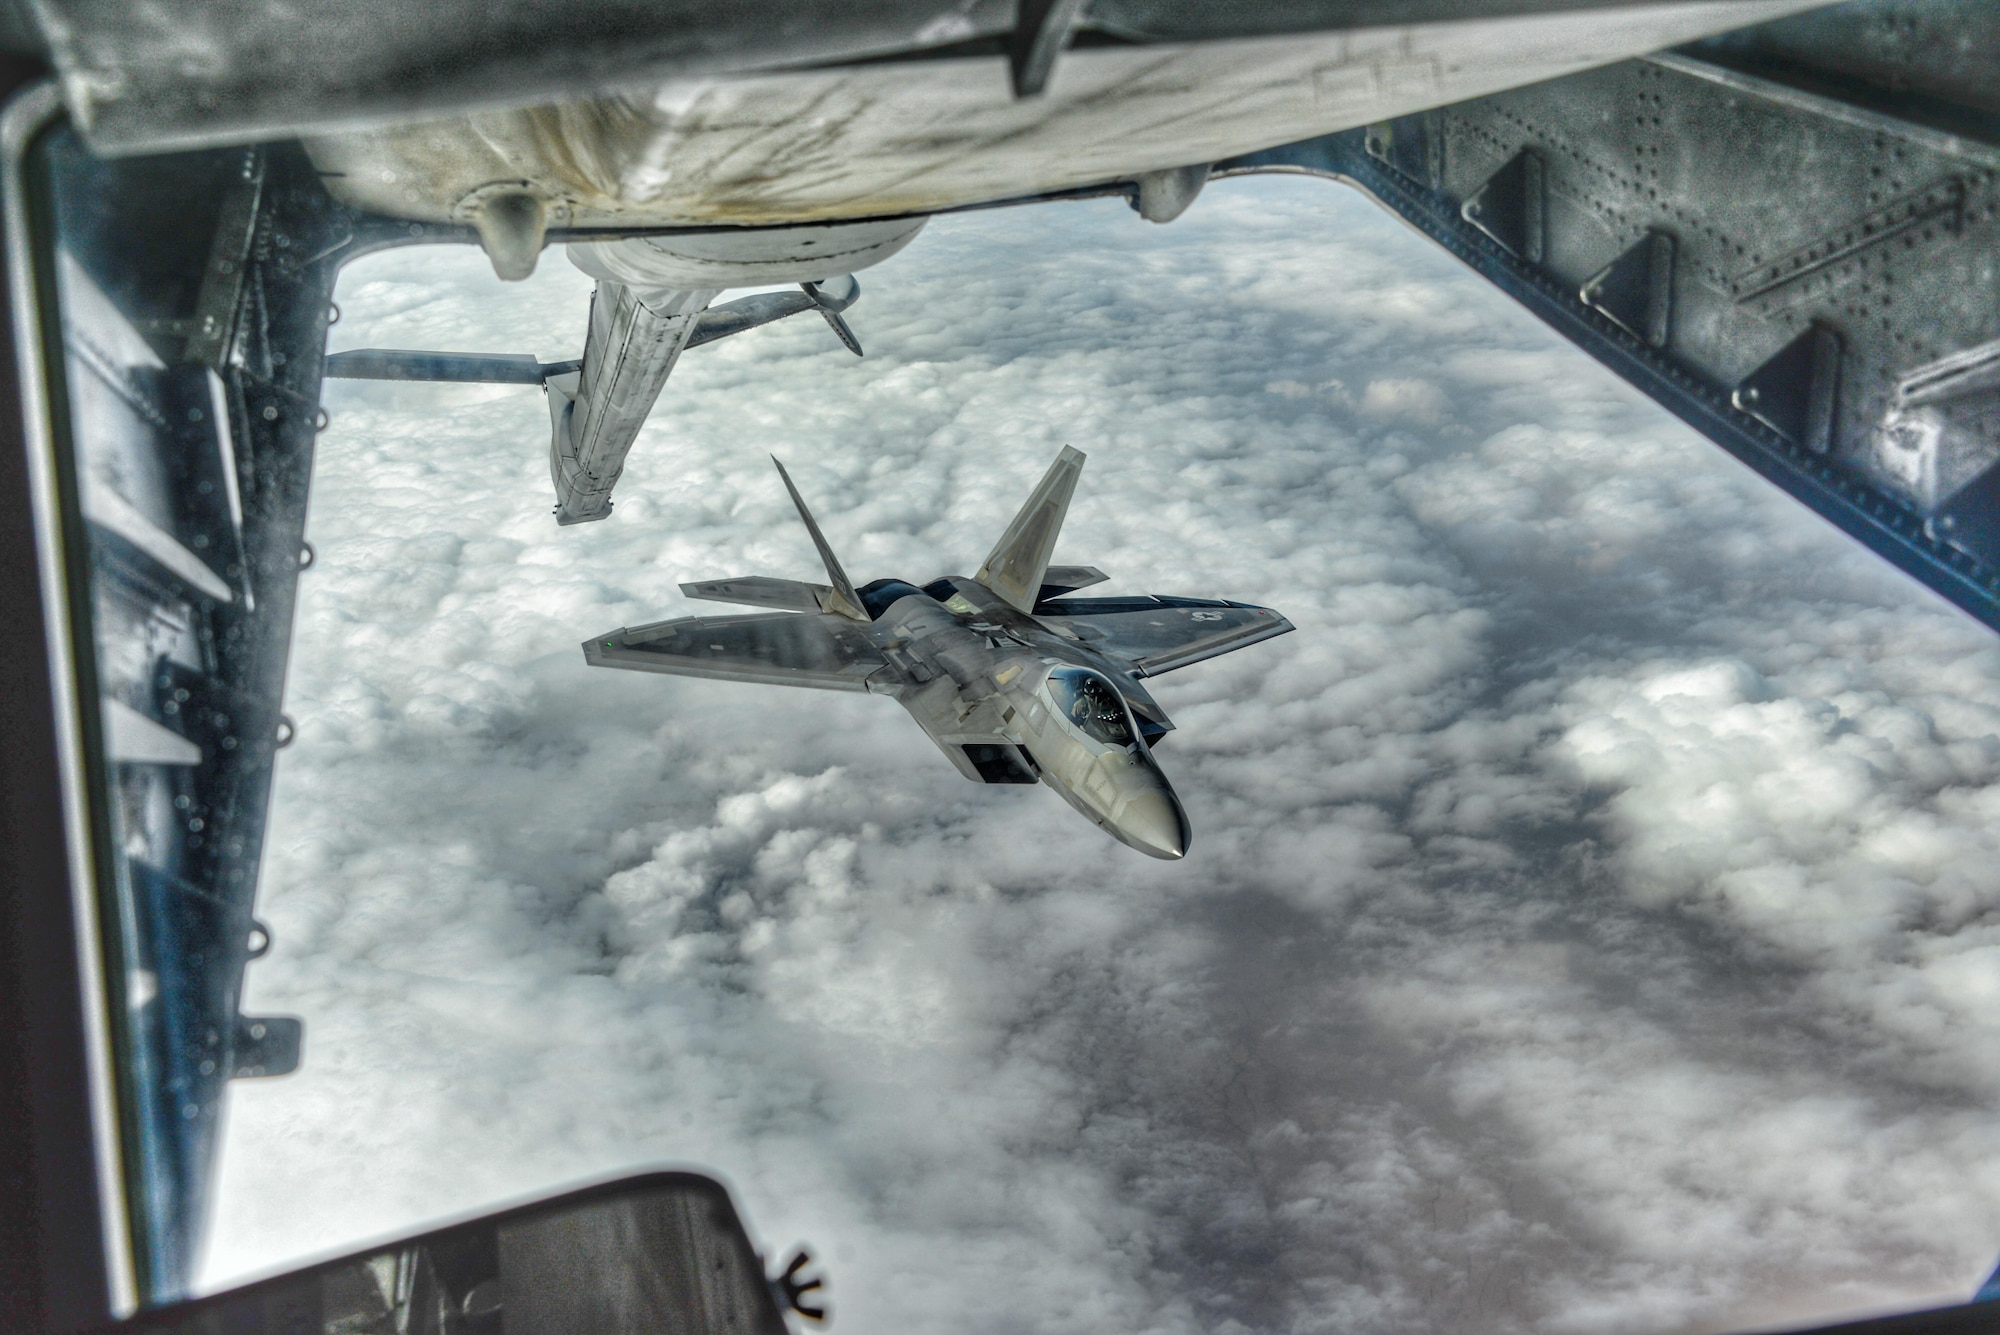 U.S. Air Force Lt. Col. August Pfluger, 380th Expeditionary Operations Support Sq. commander and F-22 Raptor pilot, maneuvers a Raptor into position to receive fuel during an air refueling over Syria, March 3, 2017.  During the refueling Pfluger re-enlisted Staff Sgt. Rebecca Rains who was in a KC-10 Extender, next to the boom operator, while reciting the oath of enlistment over headset.  “I really like the AF and I’m very passionate about my job,” Rains said.  “People are motivated in different ways and being out here supporting real-world operations and seeing the impact that my job provides for the AOR internally motivates me. I feel lucky to have had this opportunity.”  